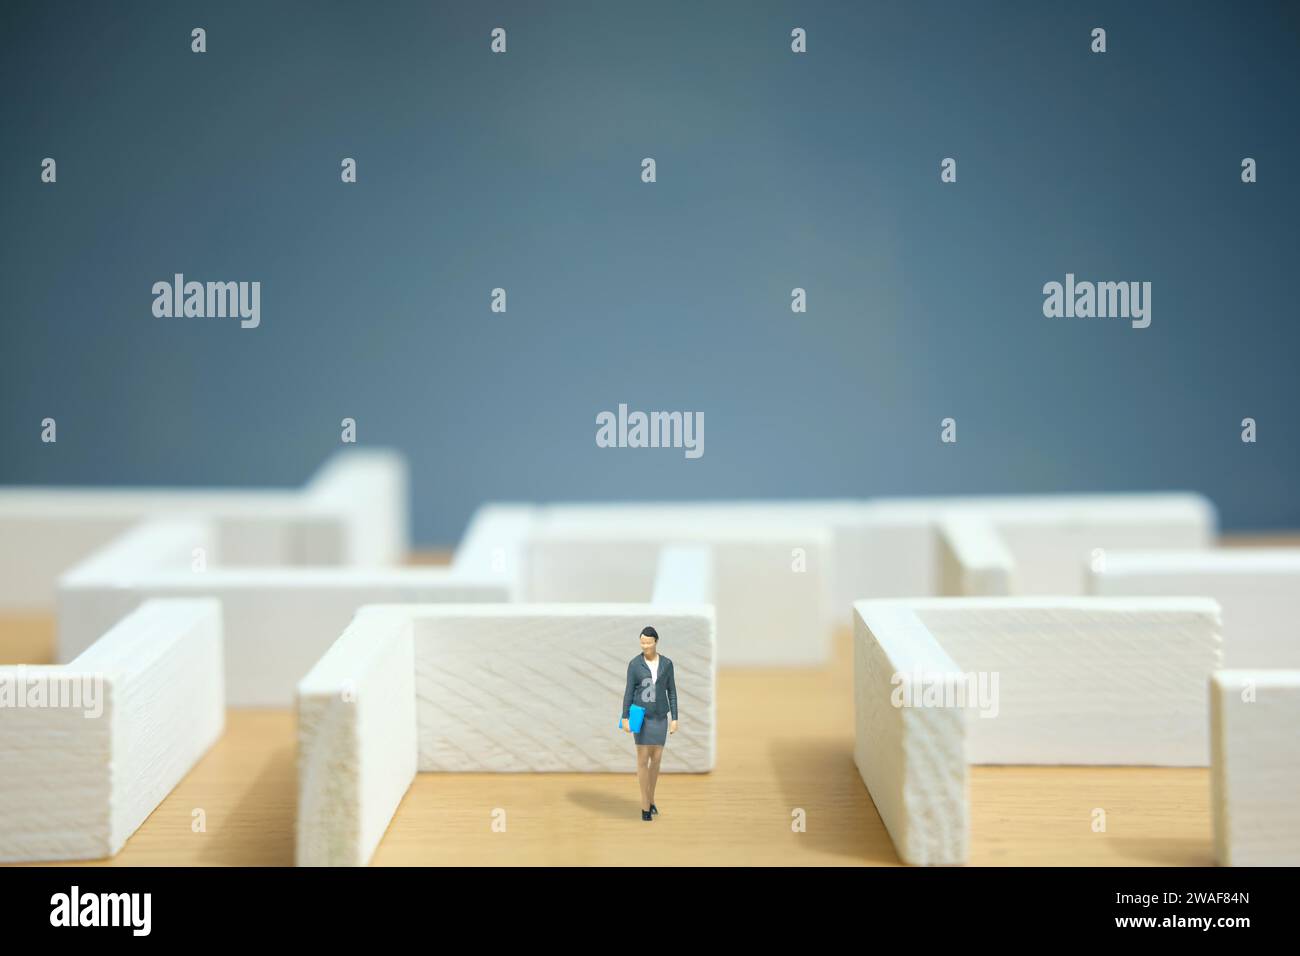 Miniature people toy figure photography. Exit business problem and solution concept. A businesswoman standing in front of maze labyrinth entrance. Ima Stock Photo